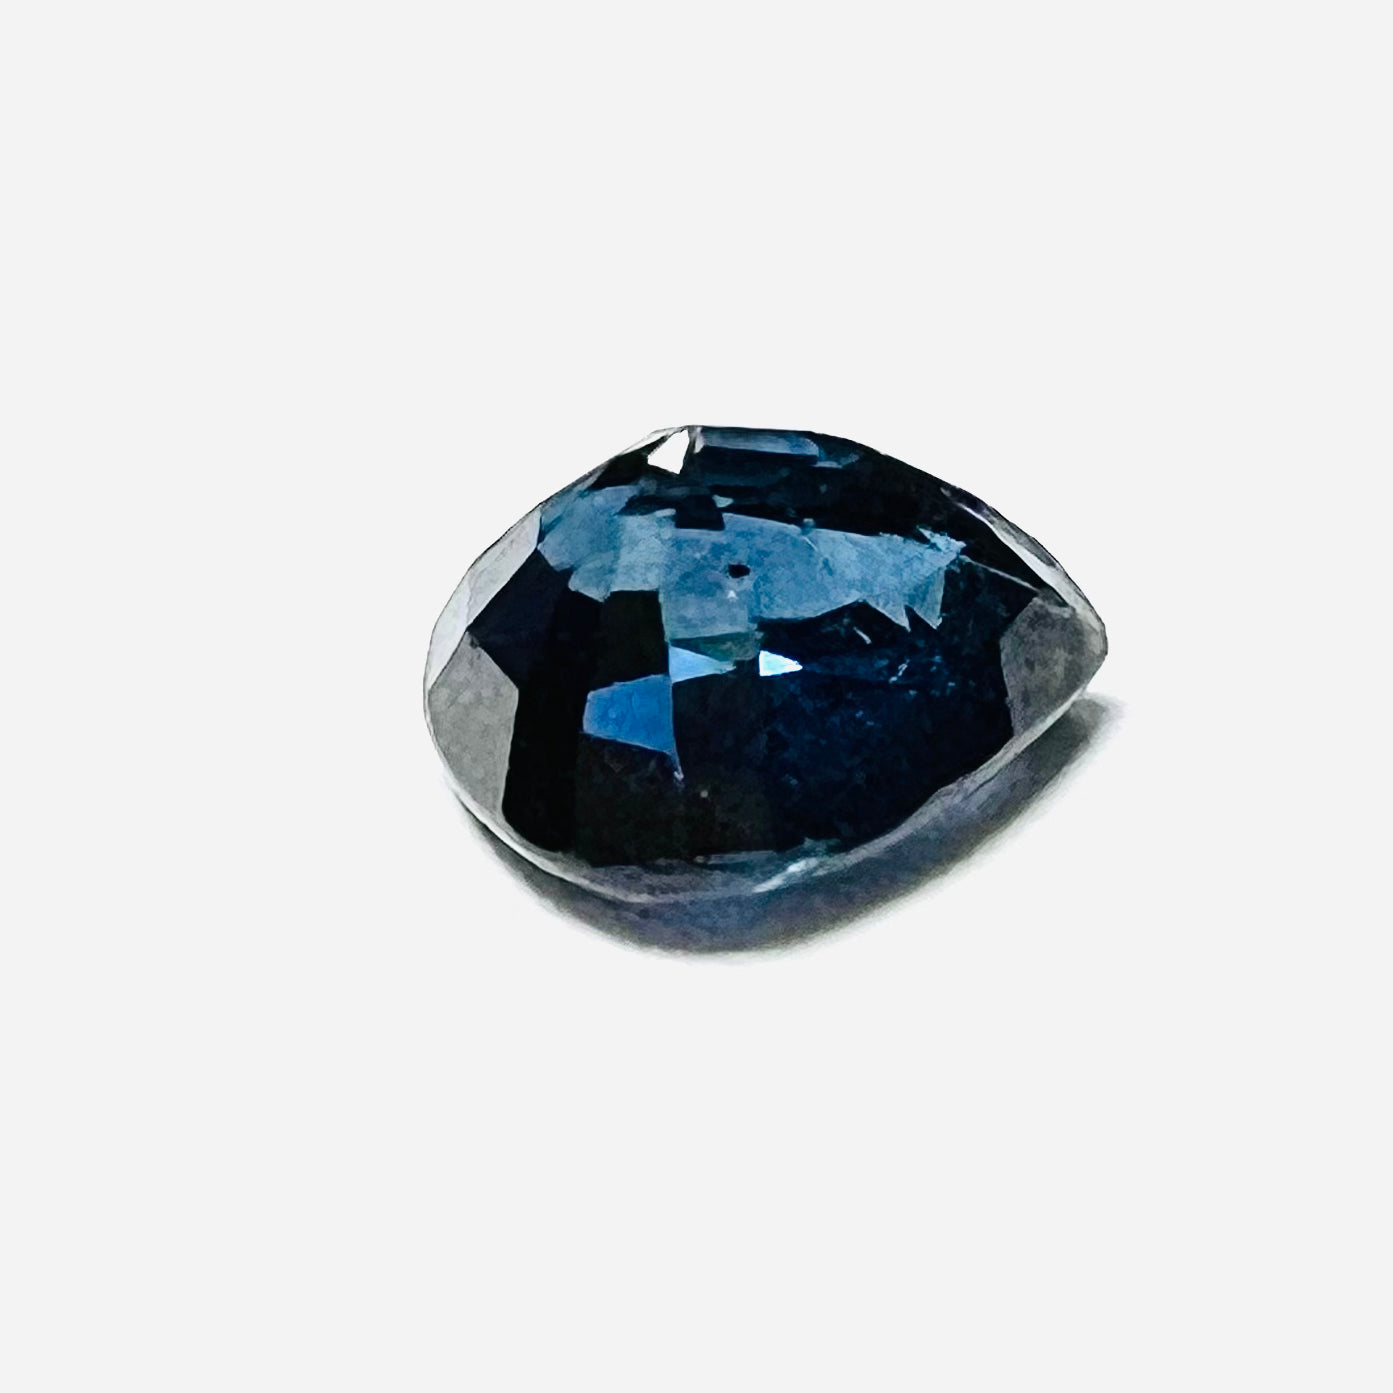 .76CT Loose Blue Pear Sapphire 6x5x4.5mmEarth mined Gemstone